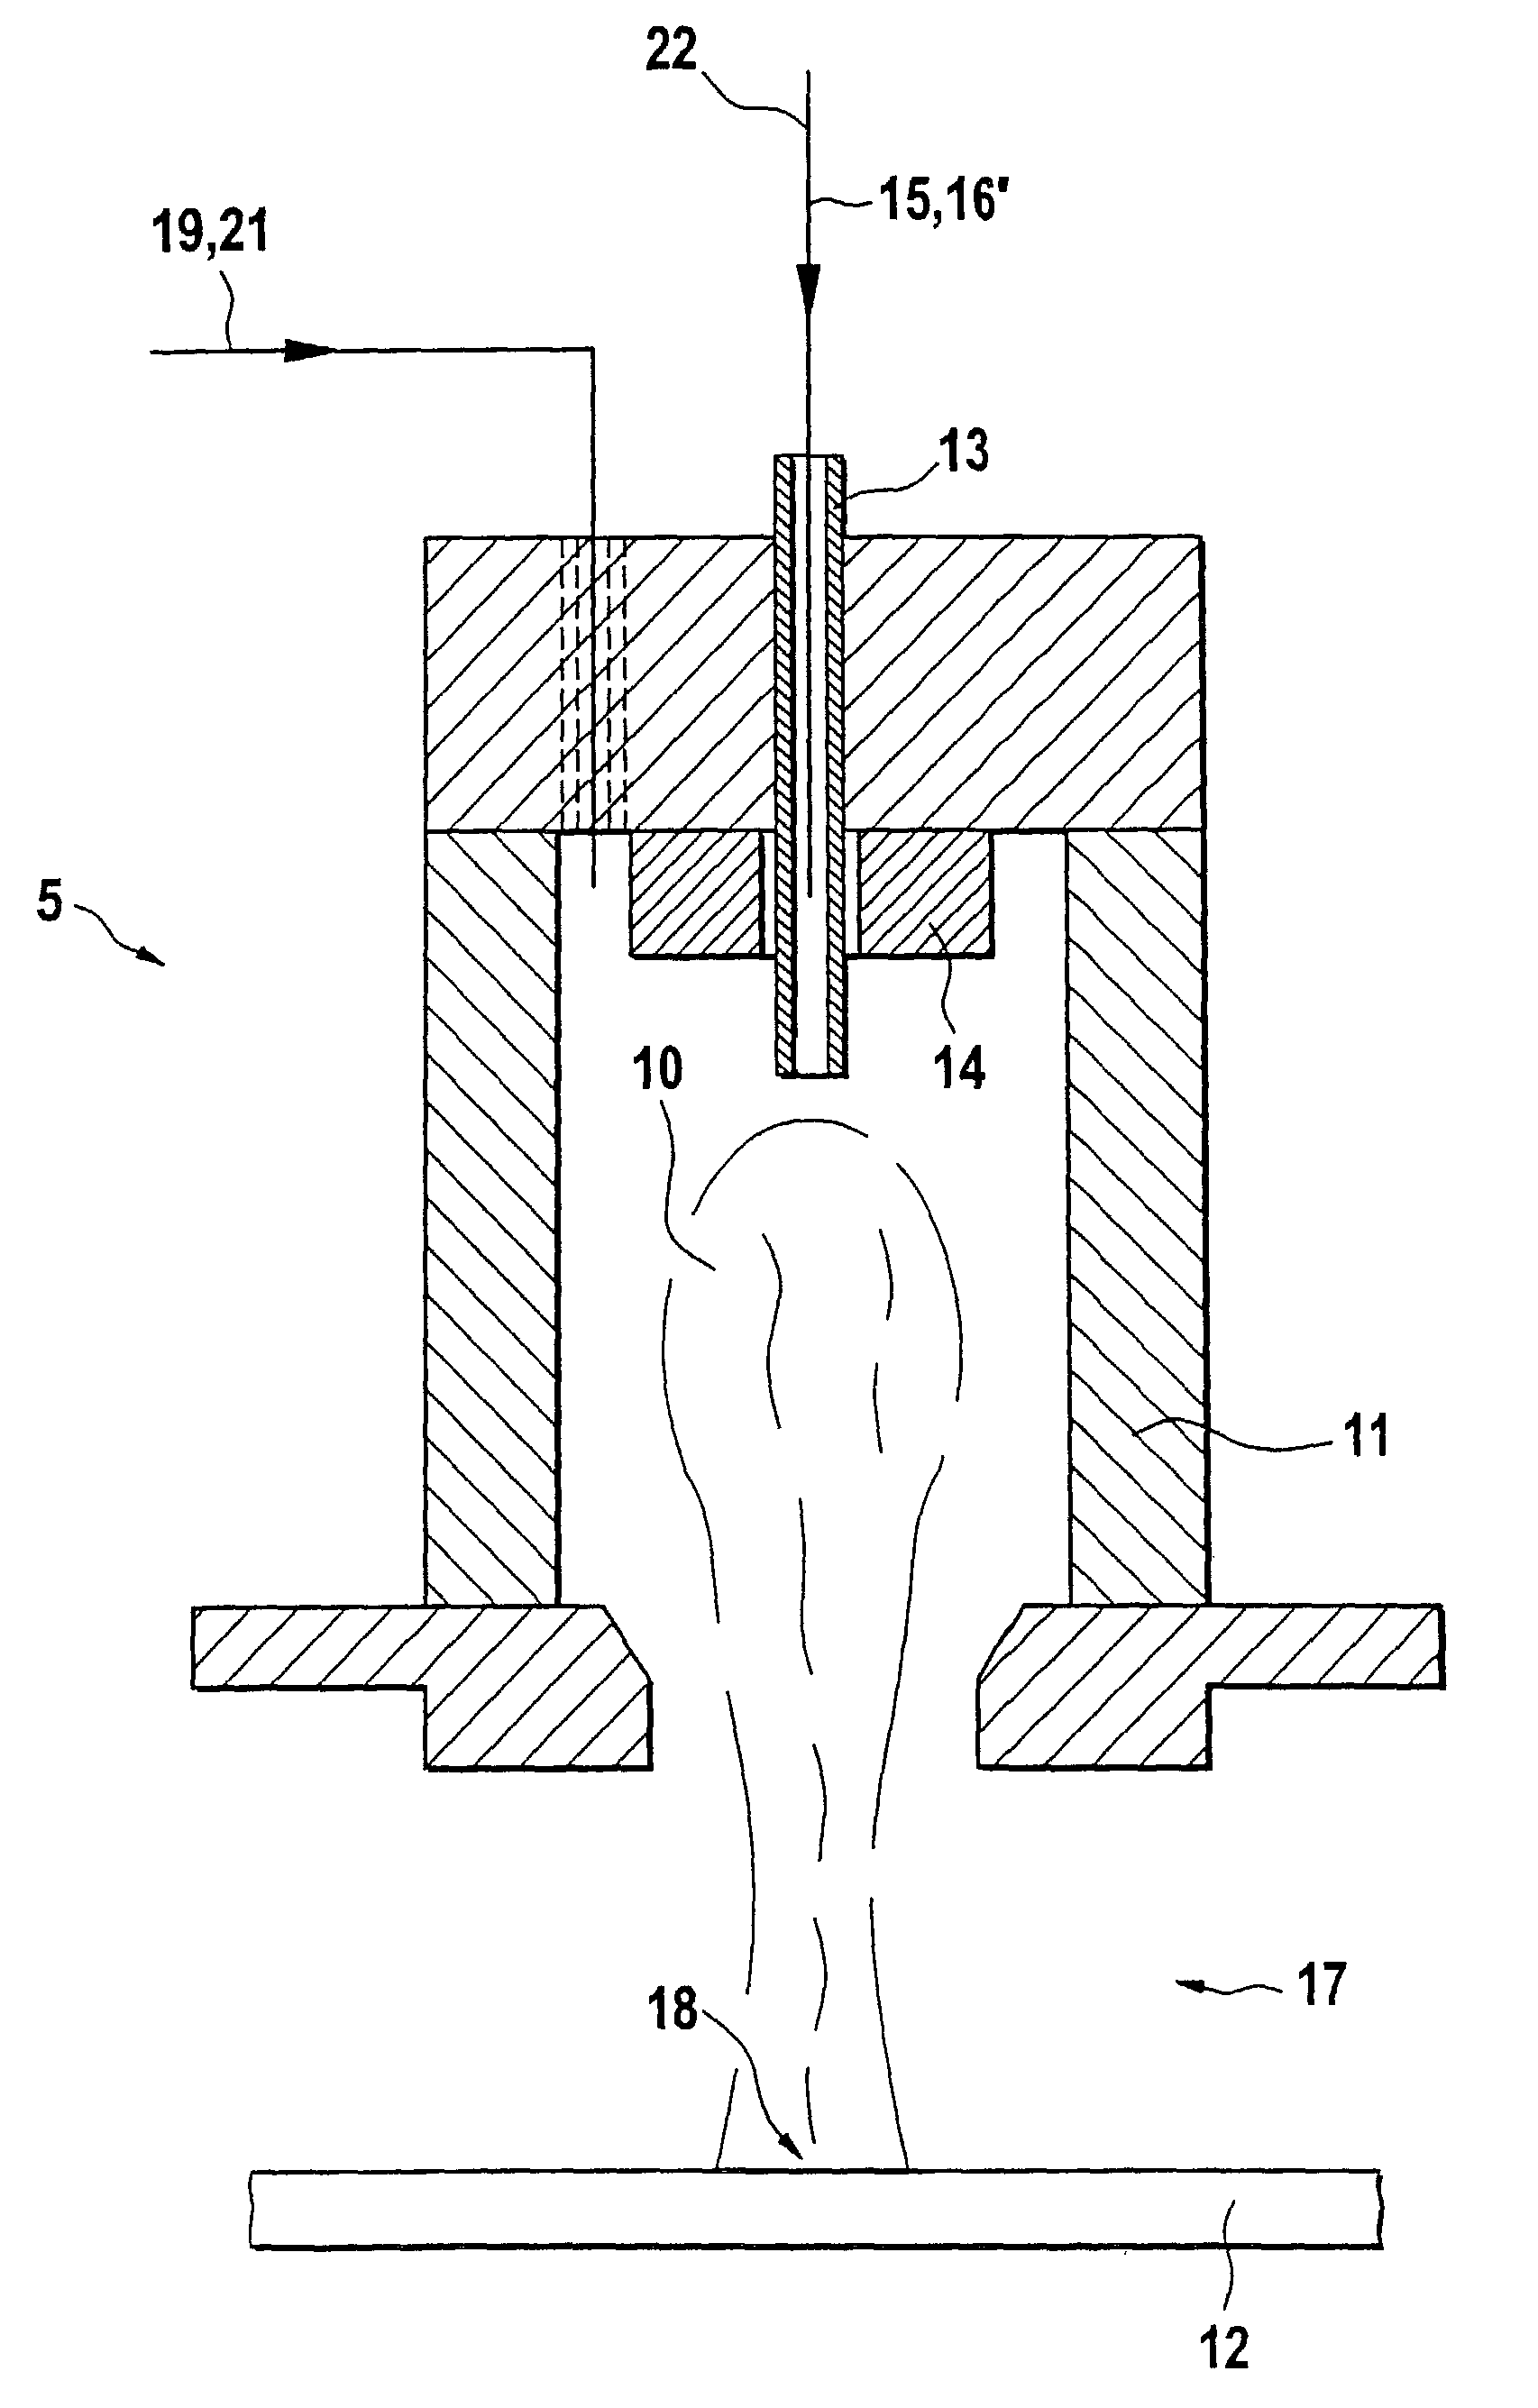 Method for producing composite layers using a plasma jet source